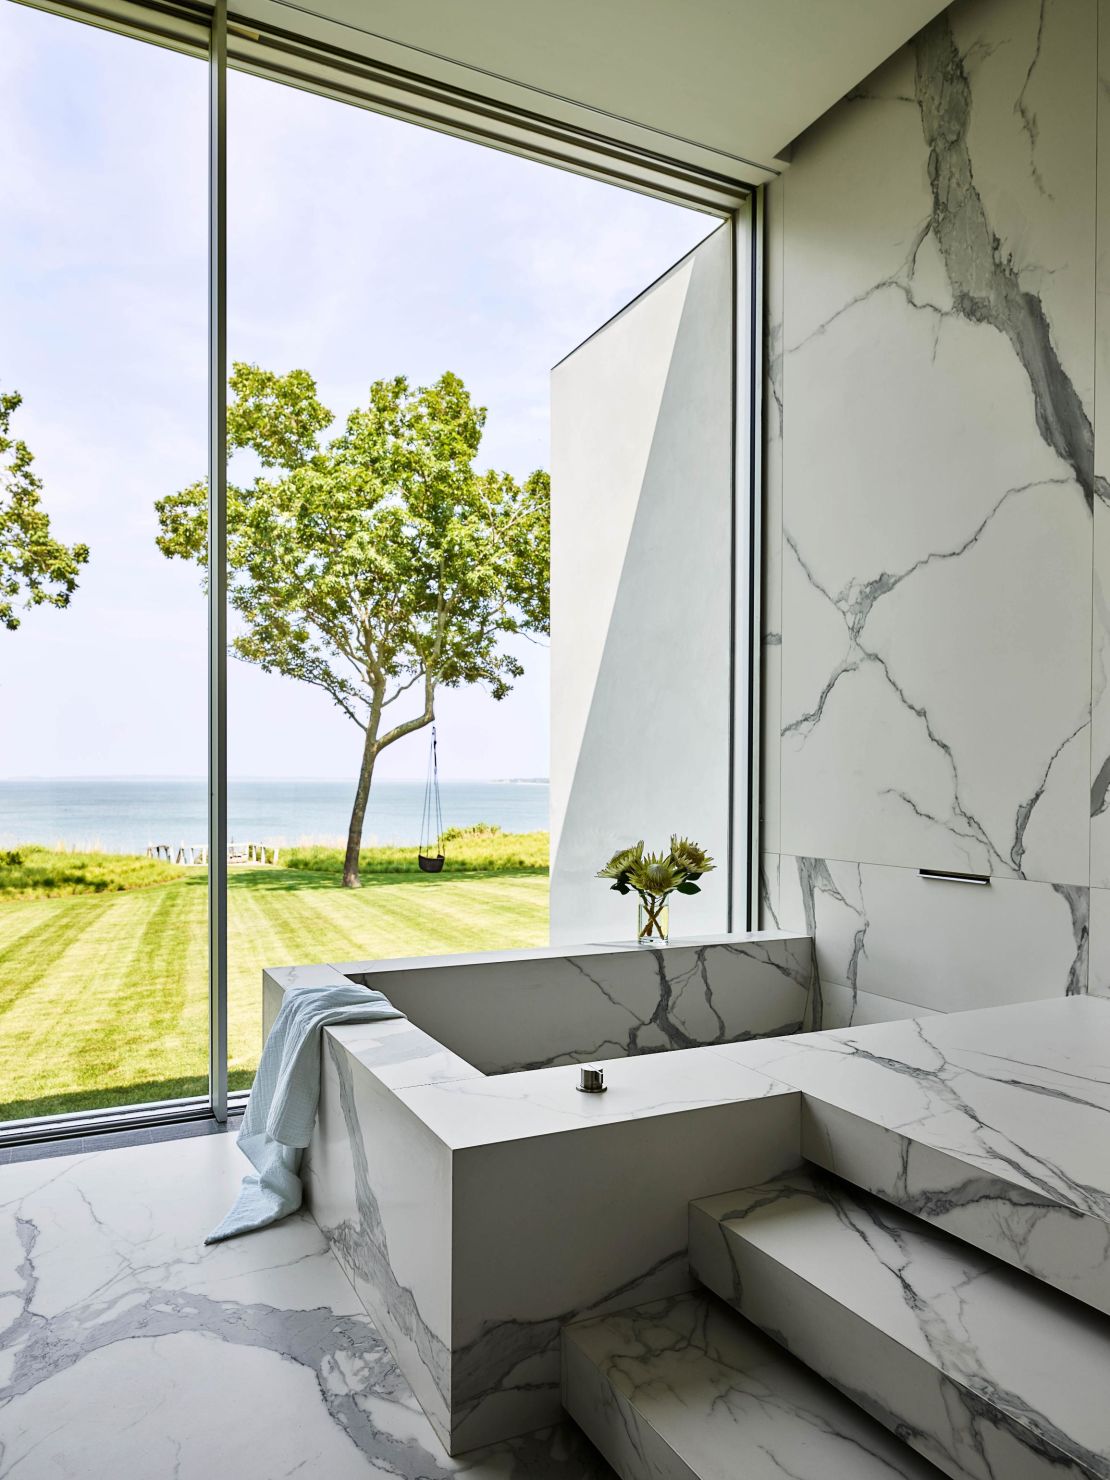 Jackman and Furness' marble-effect tiled bathroom stares out onto the horizon, creating a relaxing space to unwind in.